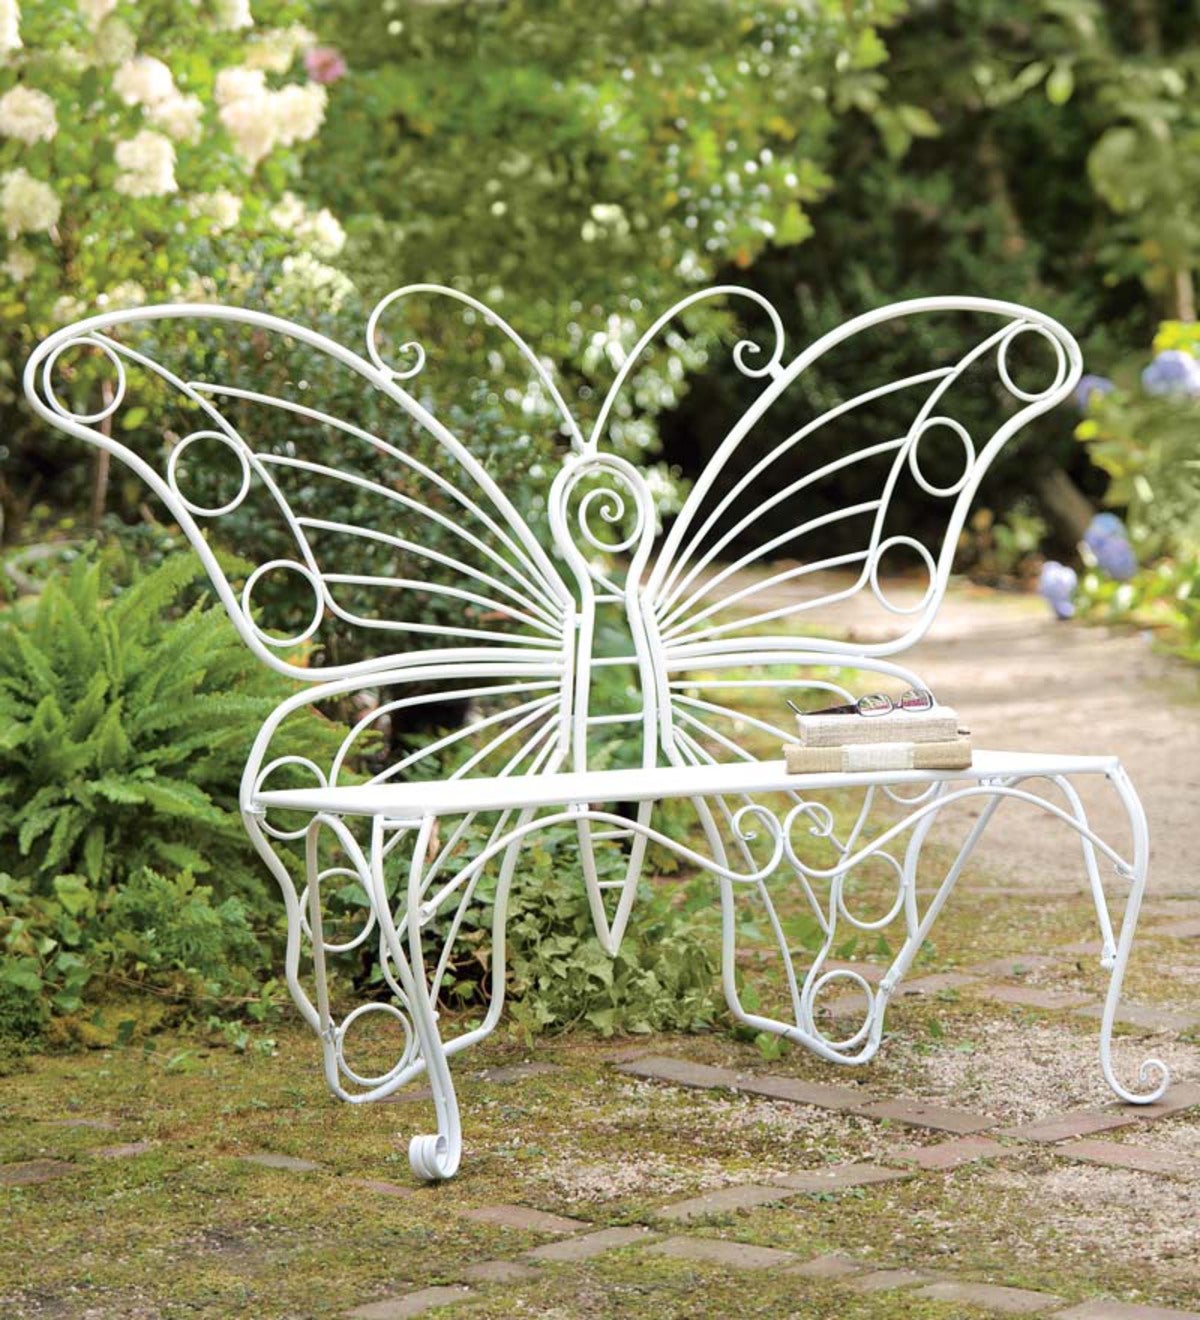 25 DIY Garden Bench Ideas - Free Plans for Outdoor Benches: butterfly bench workout